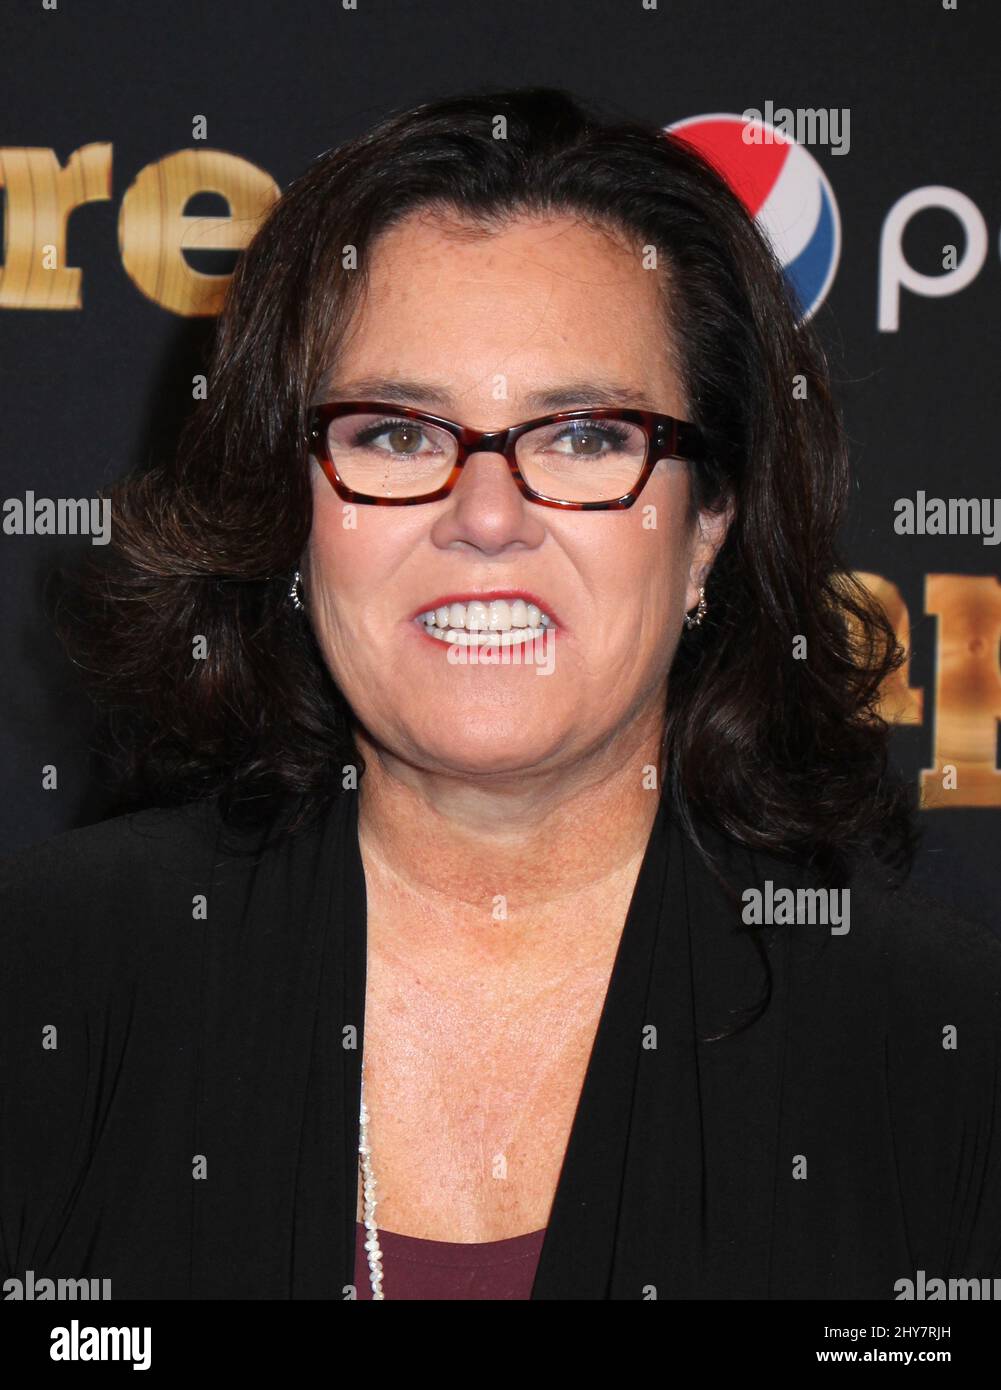 Rosie O'Donnell attending the 'Empire' Season 2 Premiere held at Carnegie Hall in New York, USA. Stock Photo